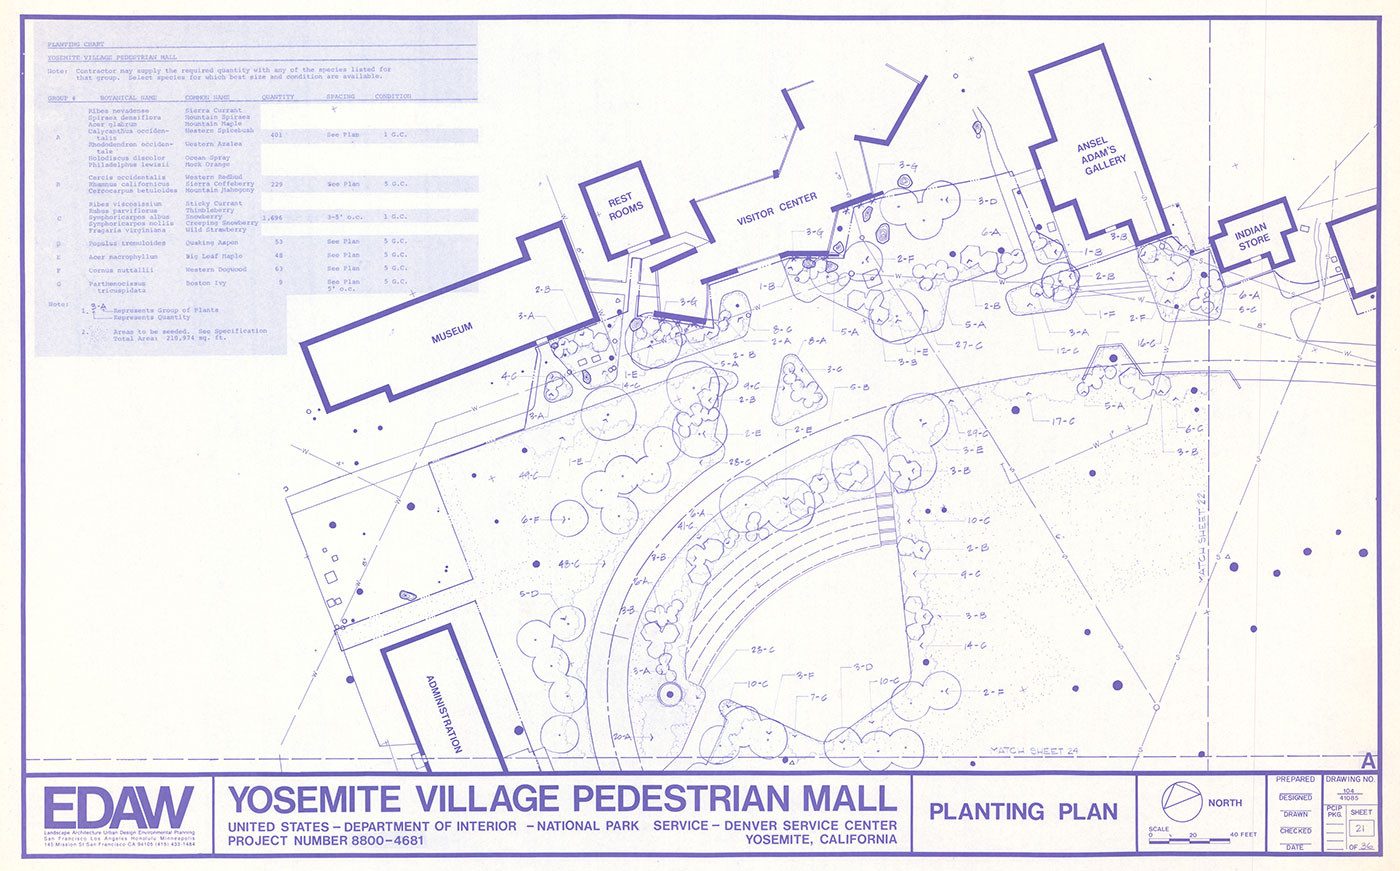 Image showing a contractor's drawing for the Yosemite Village Pedestrian Mall